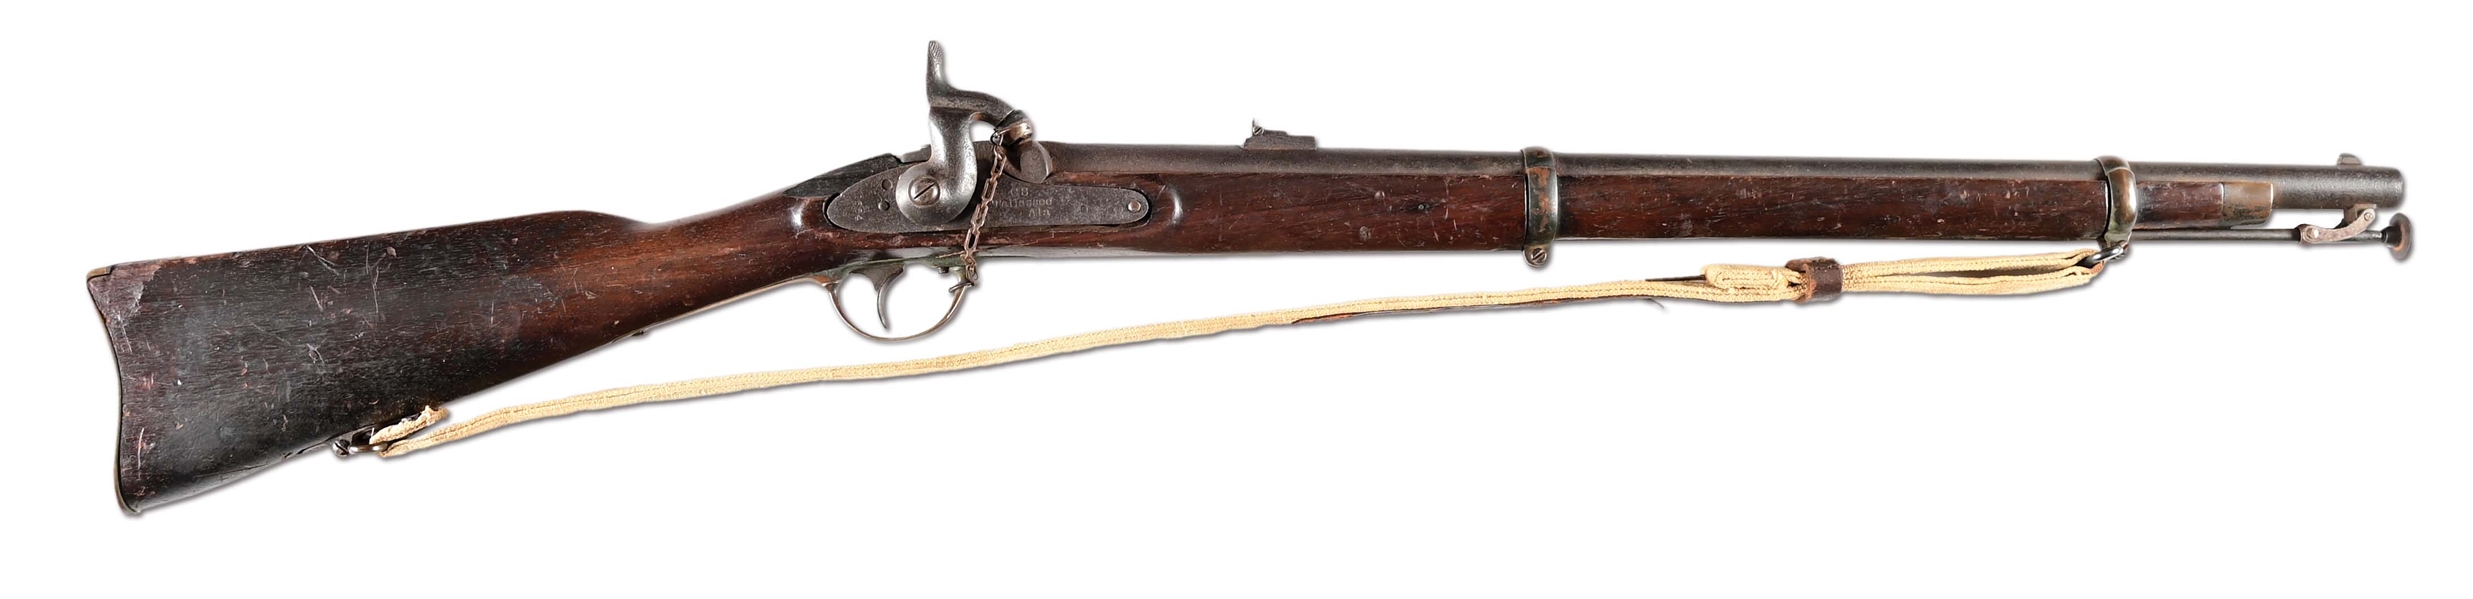 (A) EXTREMELY RARE CONFEDERATE TALLASSEE PERCUSSION CARBINE.